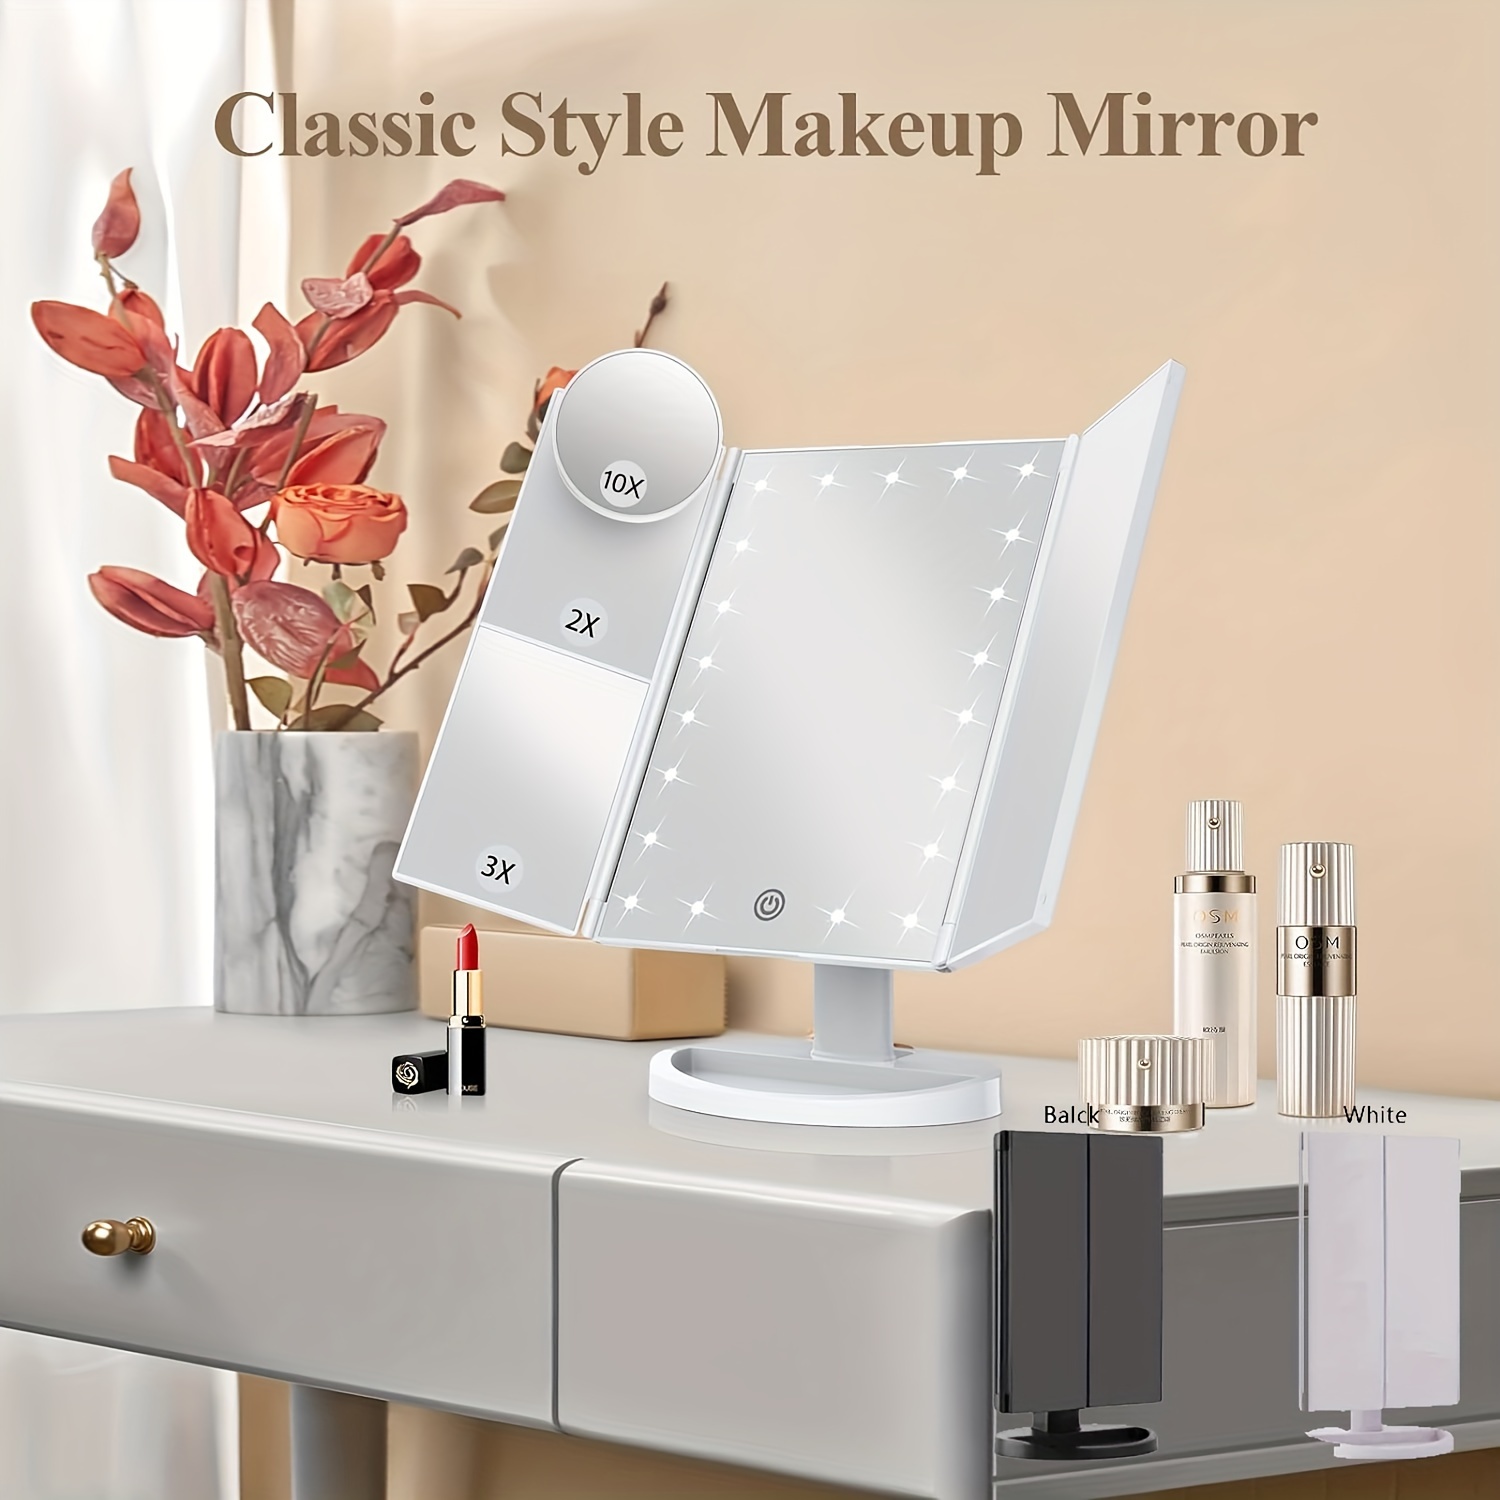 

1pc Tri-fold Led Makeup Mirror With Touch Control, 3 Panel Vanity Mirror With 2x, 3x, 10x Magnification, Adjustable Brightness, Dual Power Supply, Portable Design, Ideal Women's Gift